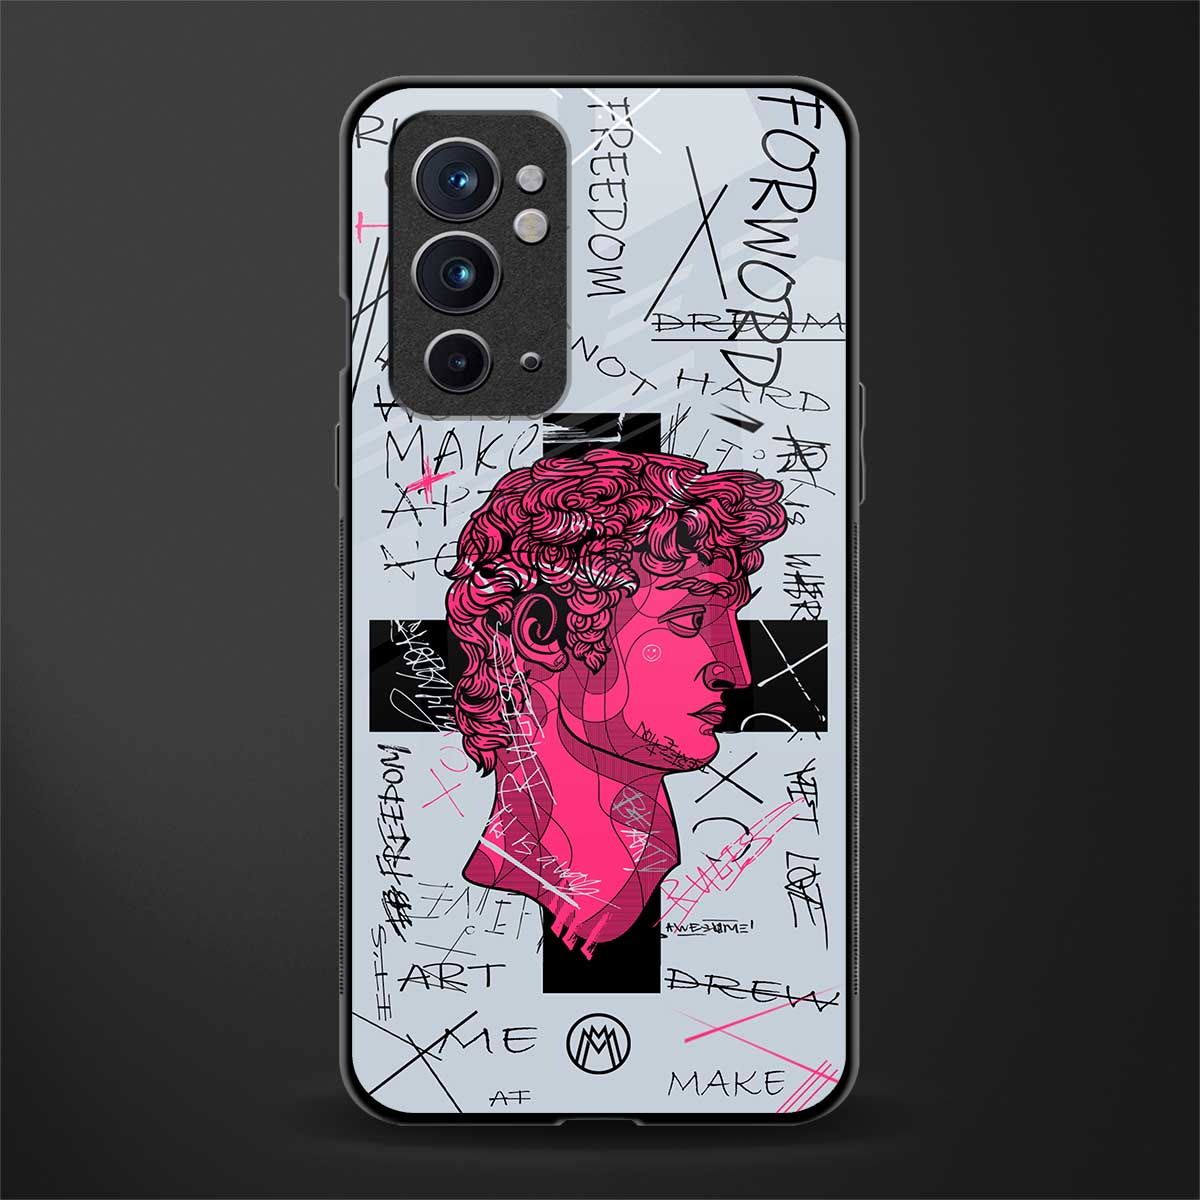 lost in reality david glass case for oneplus 9rt image